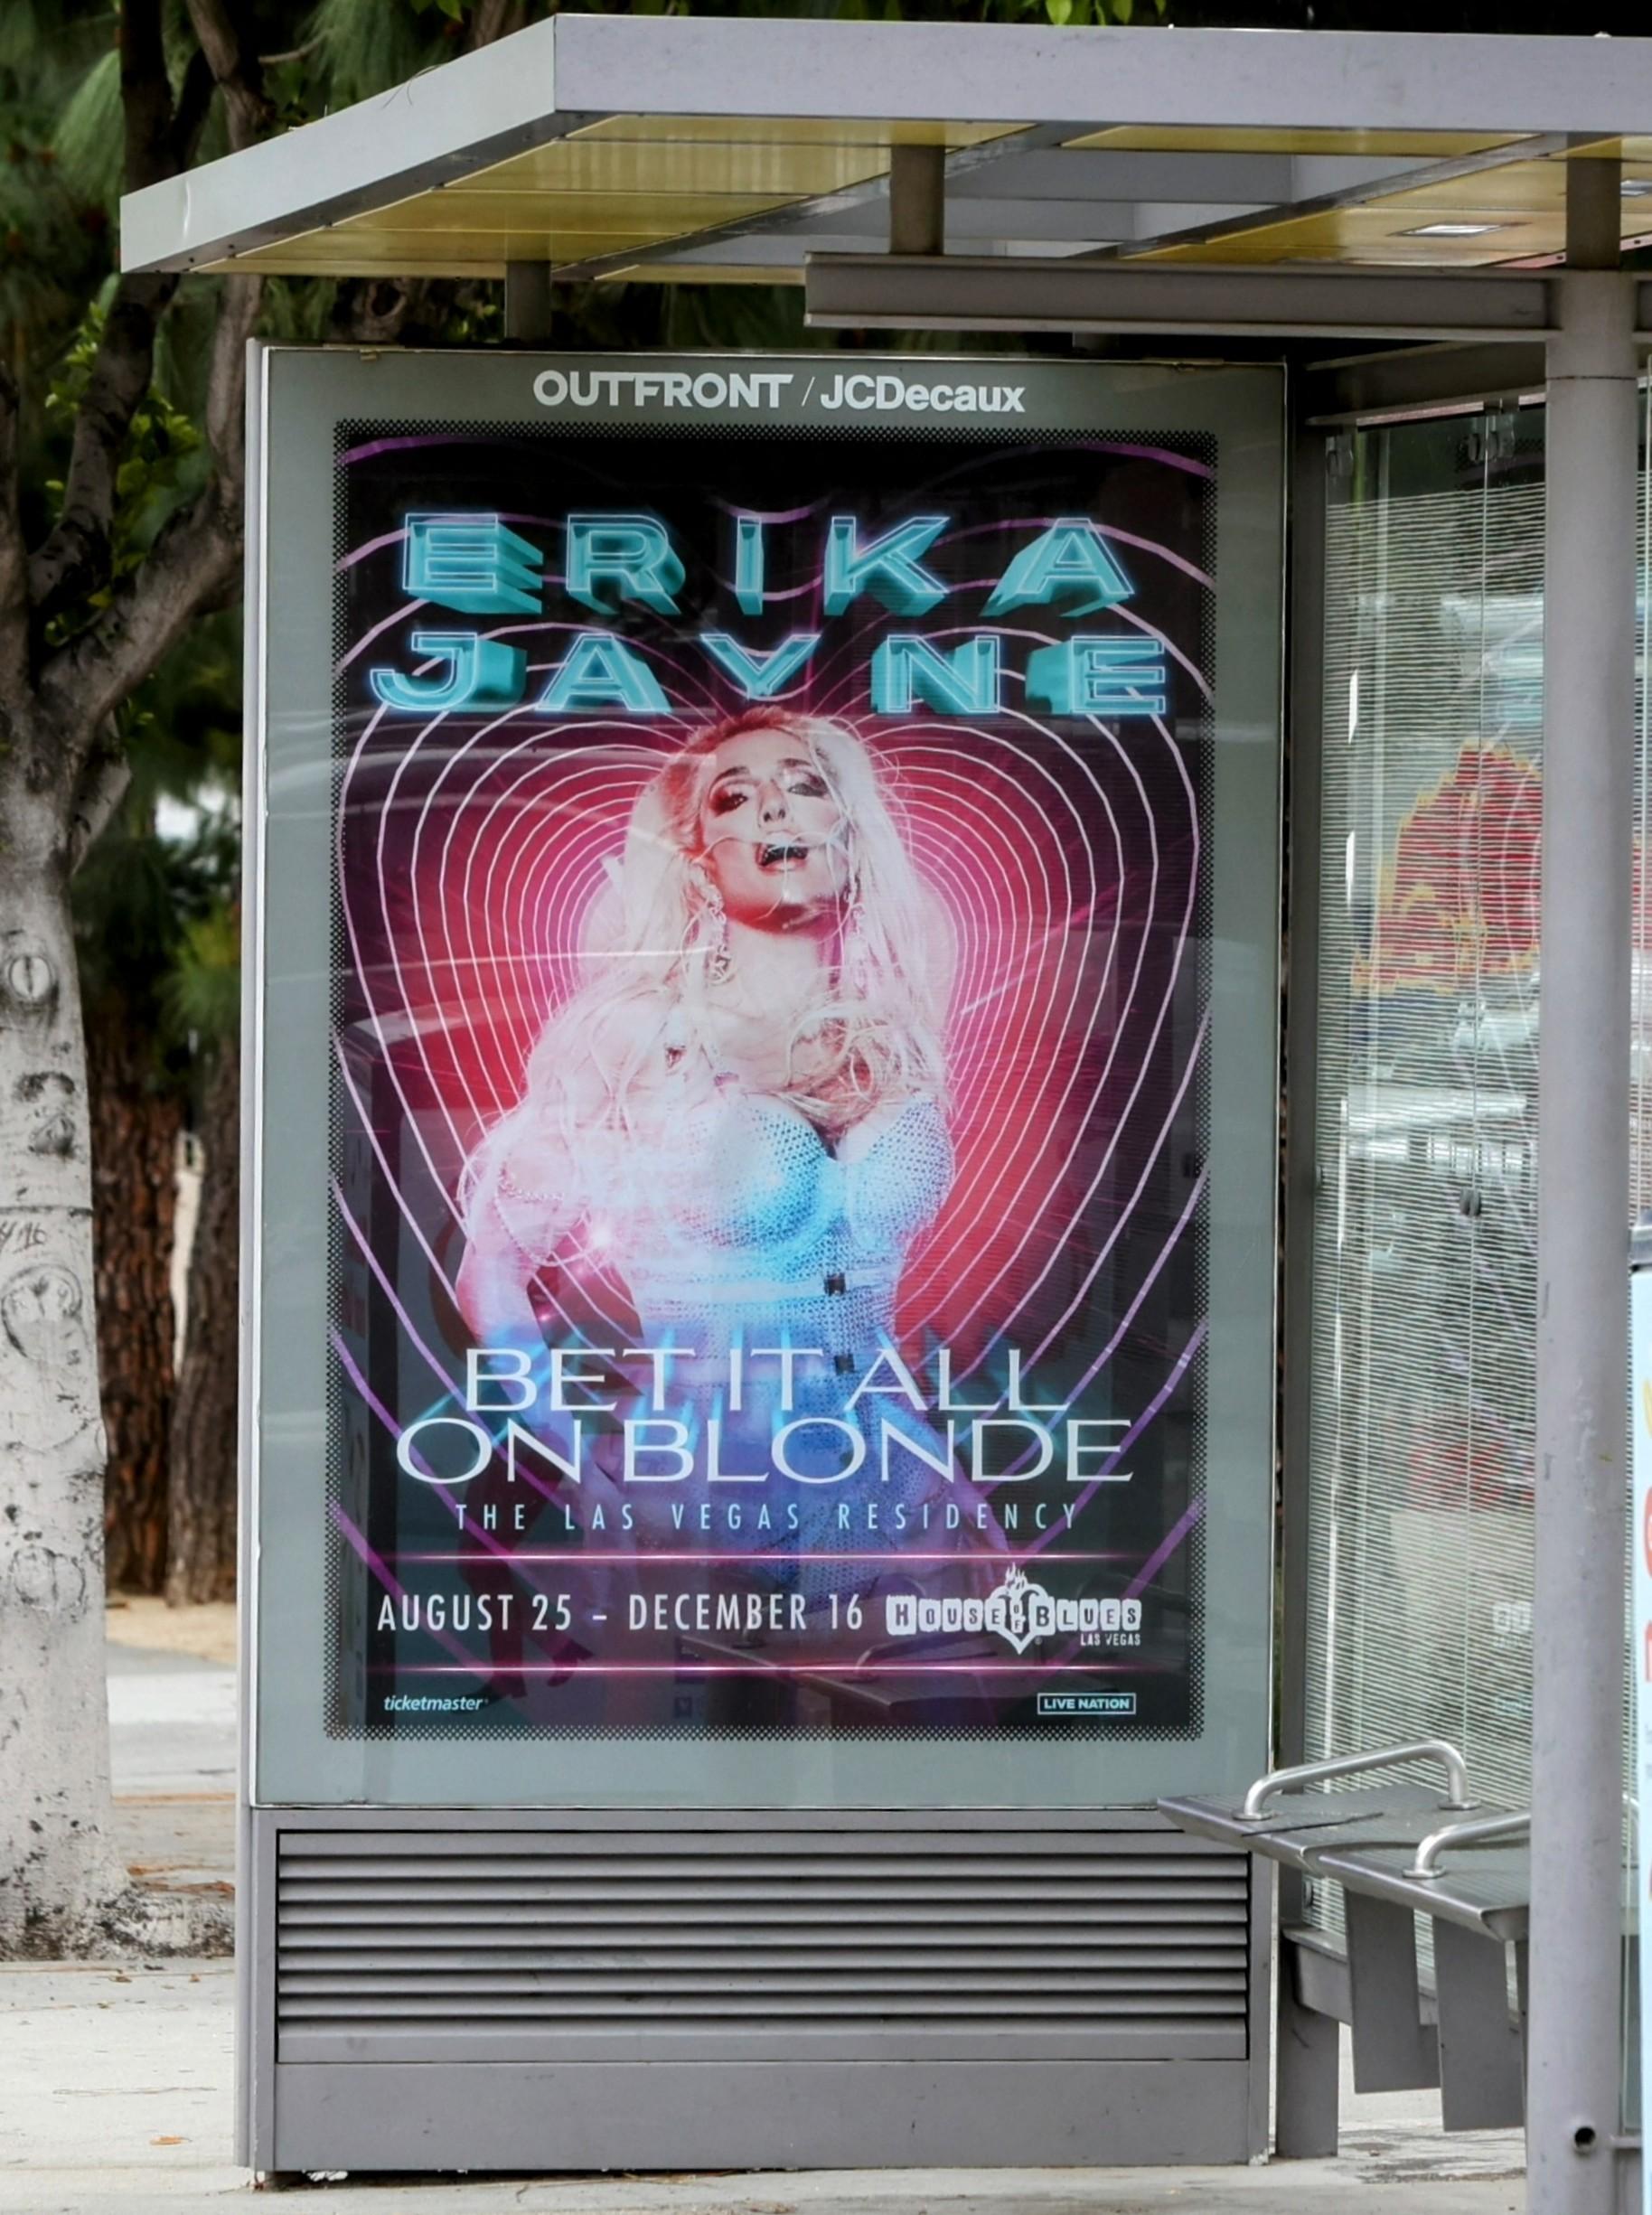 Erika Jayne plastered all over Los Angeles in her comeback after long winded allegations and victory over ex Girardi legal battles